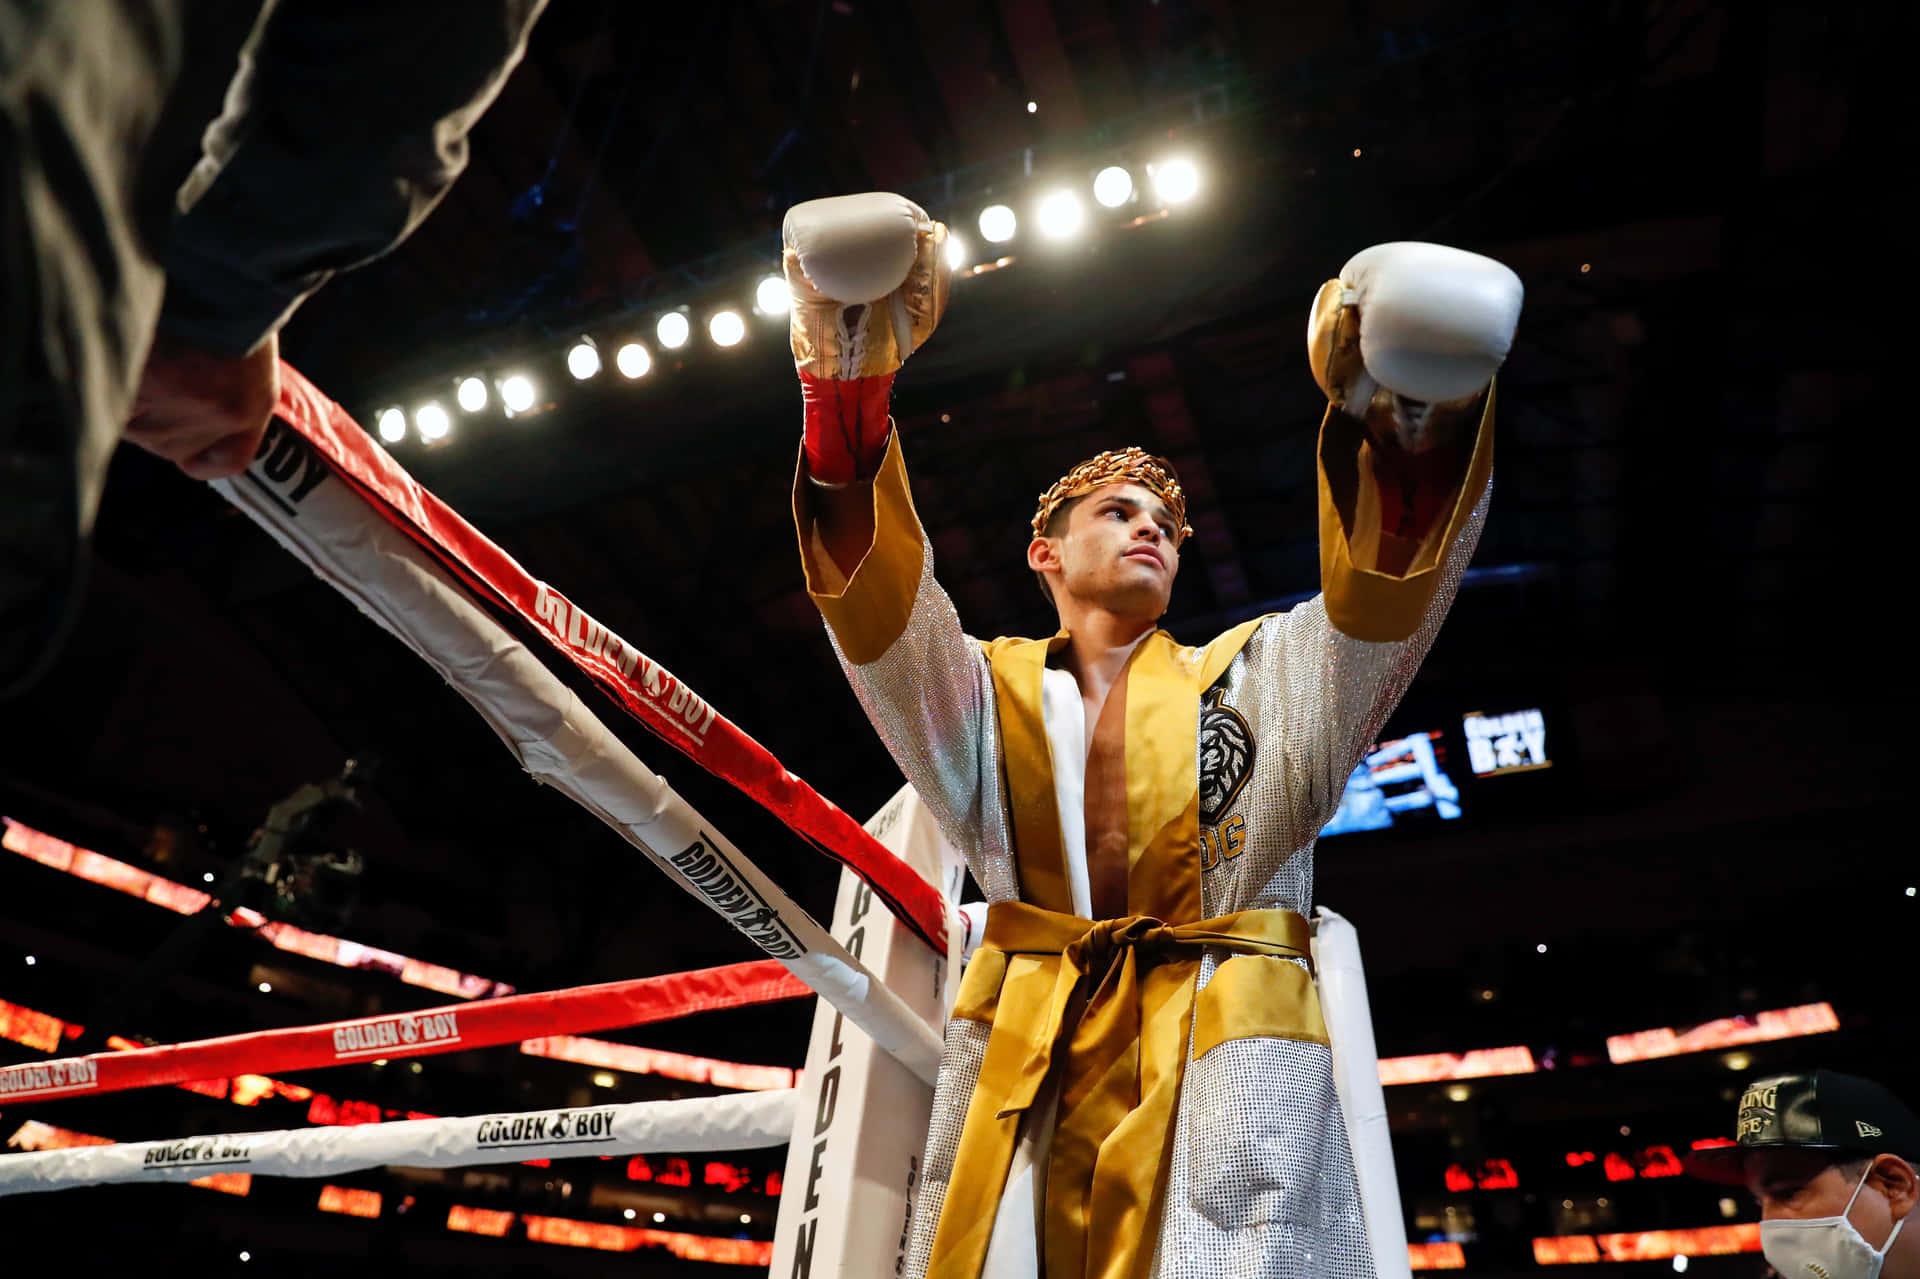 Download A Boxer In A Boxing Robe Is Standing In The Ring